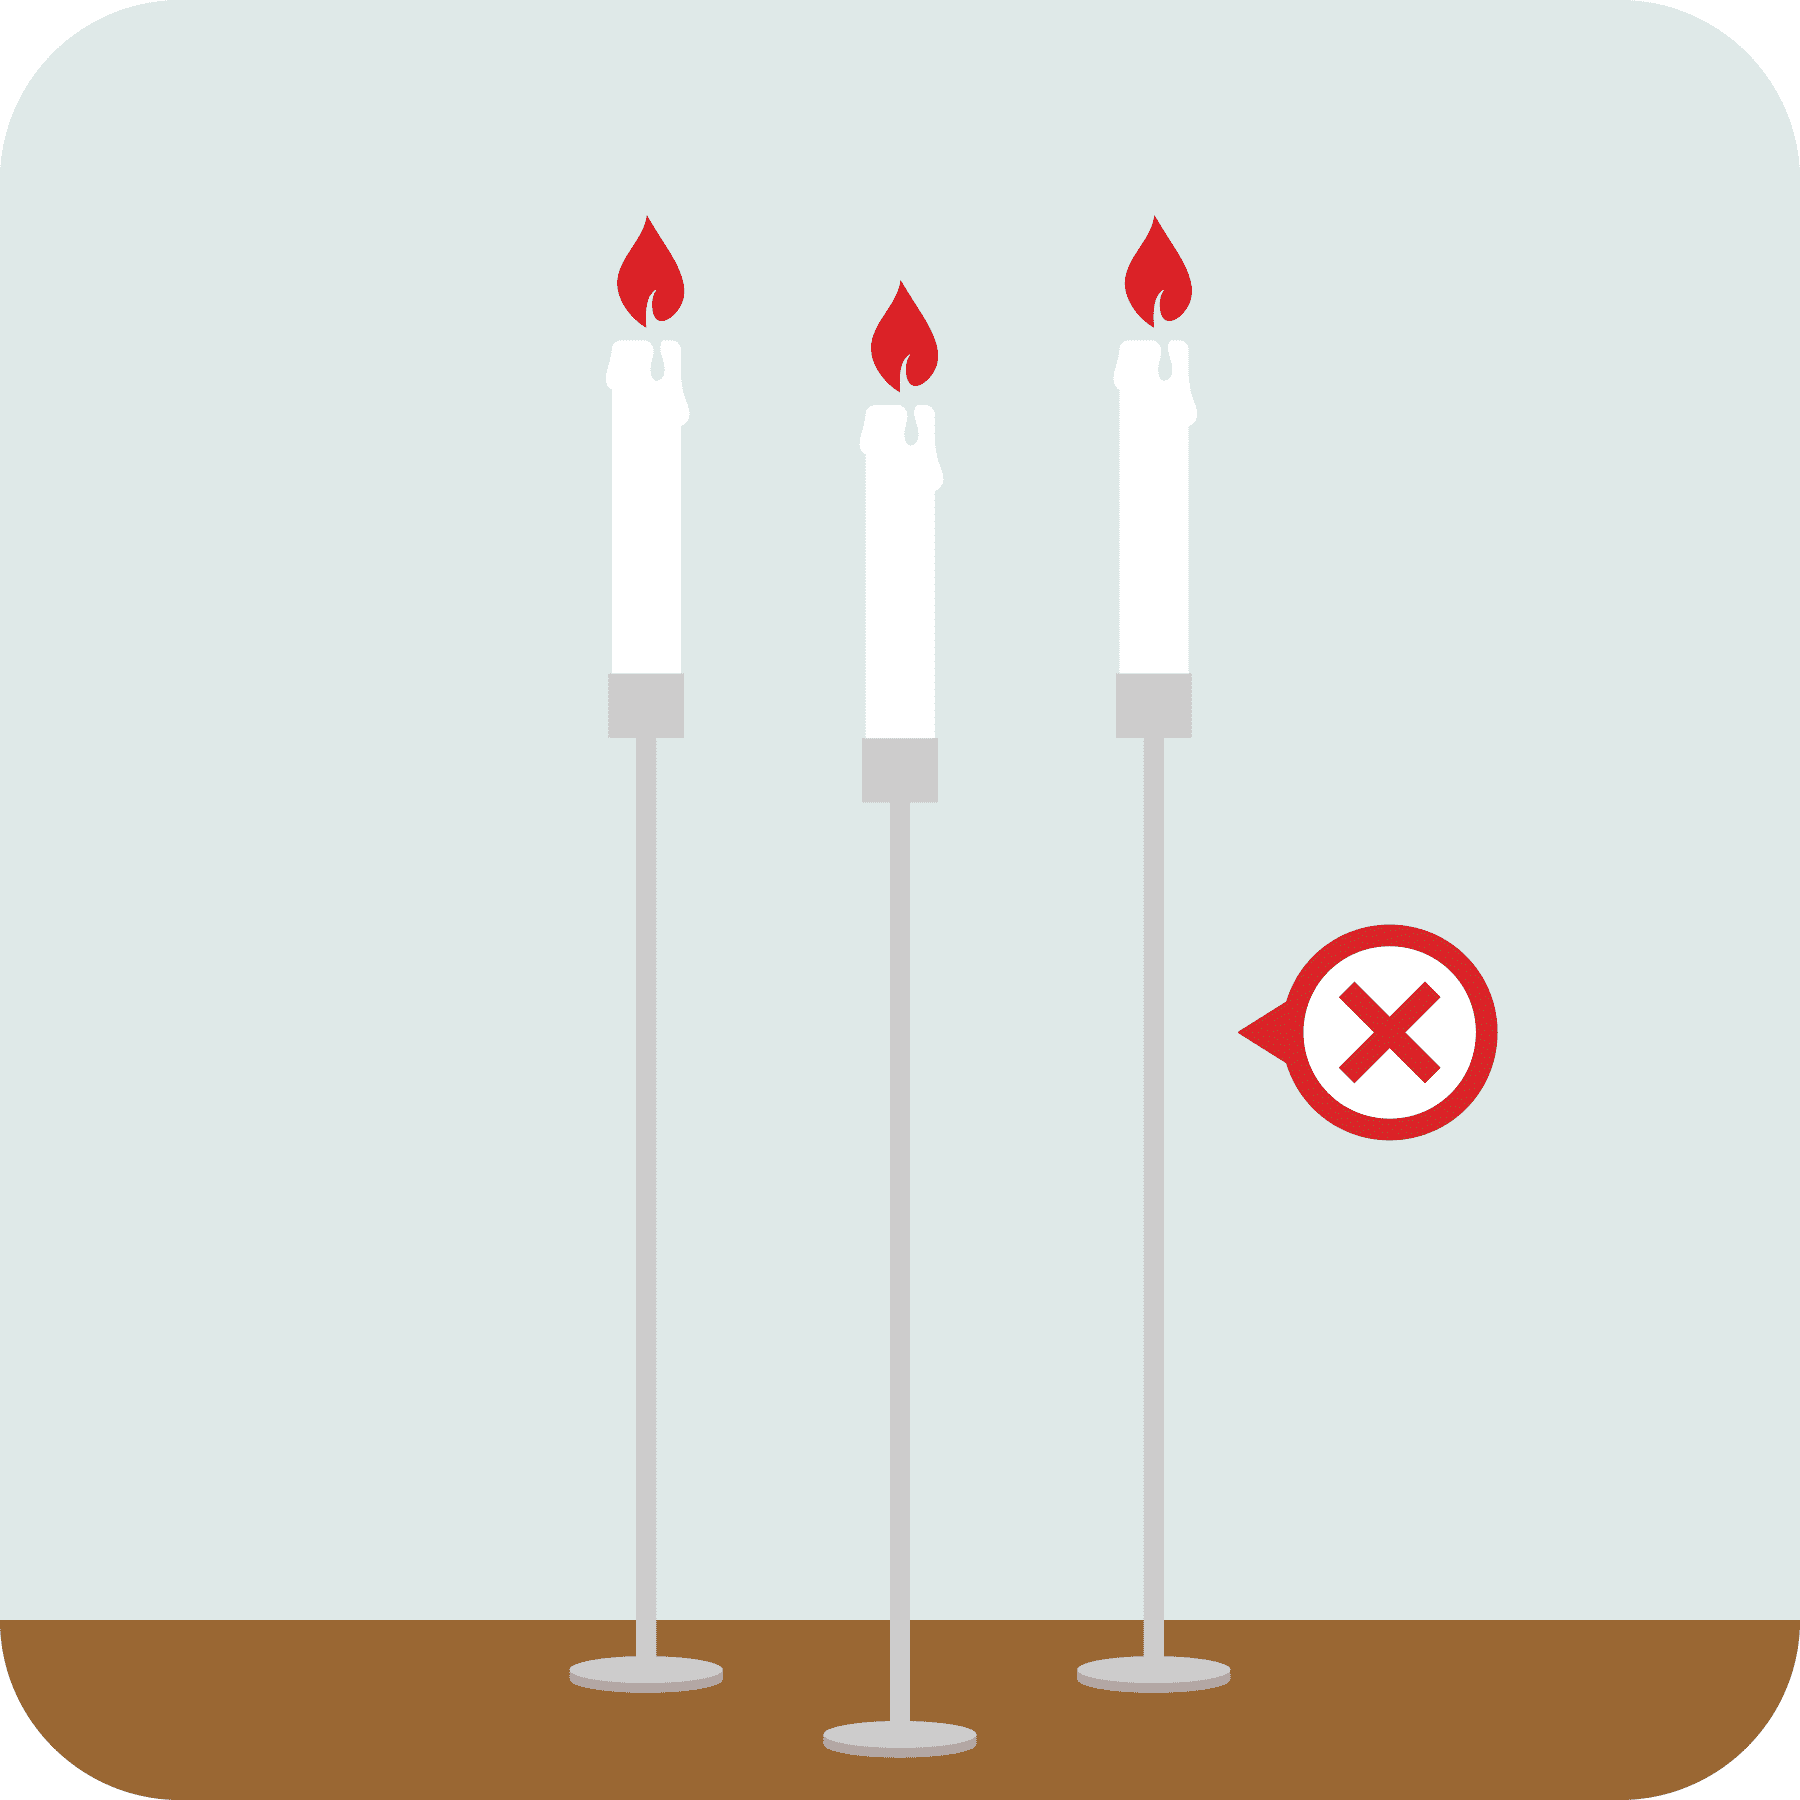 When you use candles, place them in a sturdy, safe candle holder that will not burn or tip over.